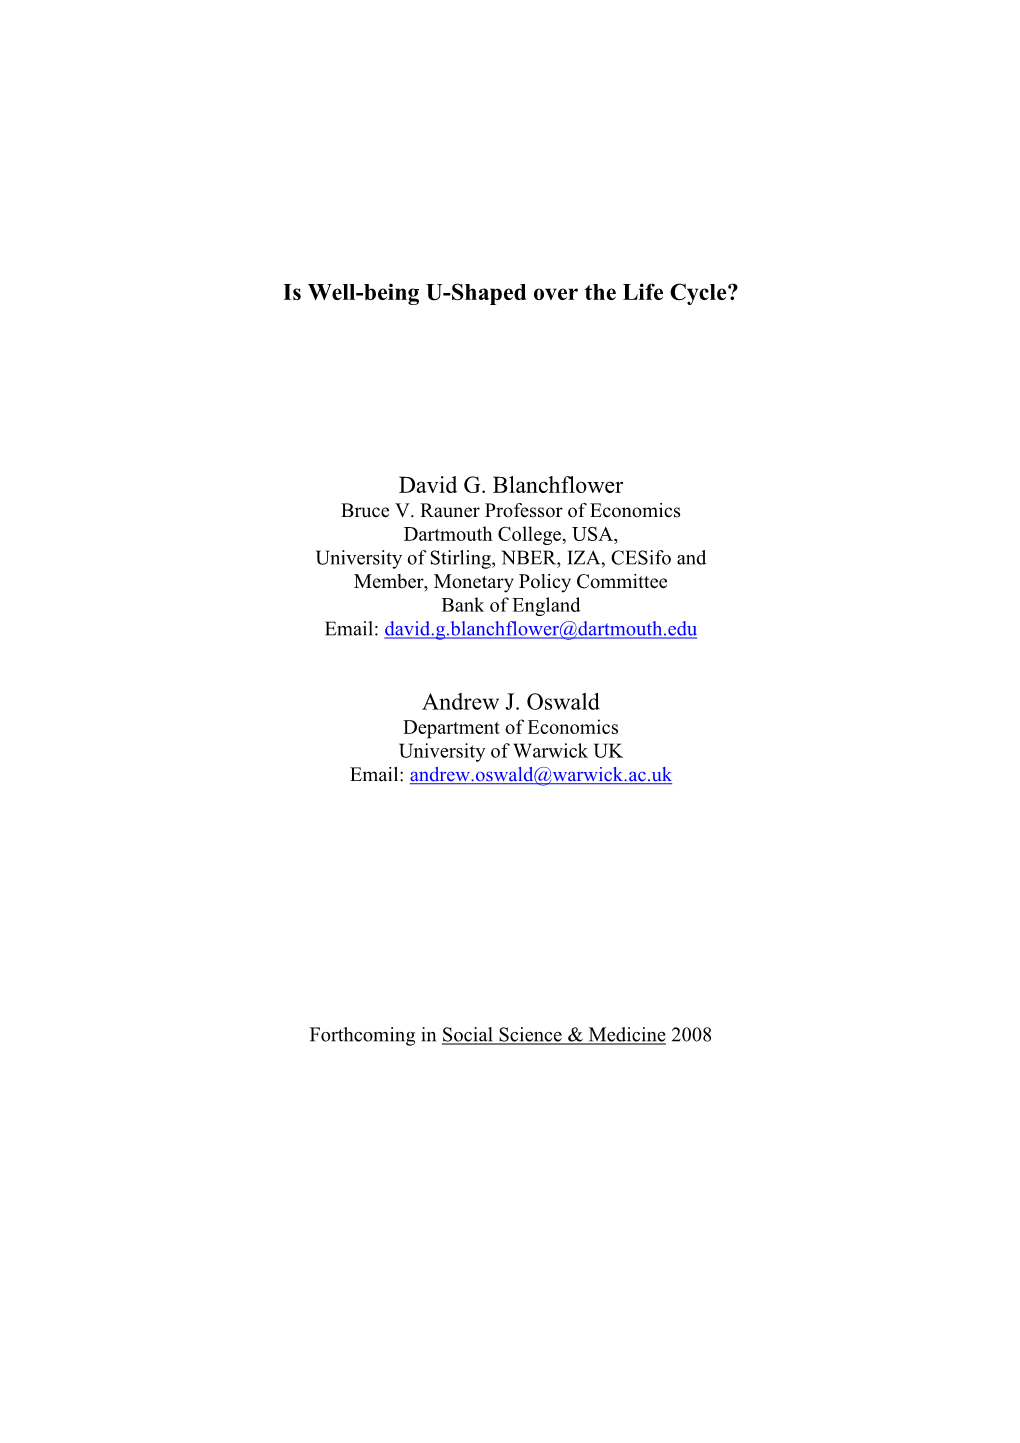 Is Well-Being U-Shaped Over the Life Cycle? David G. Blanchflower Andrew J. Oswald